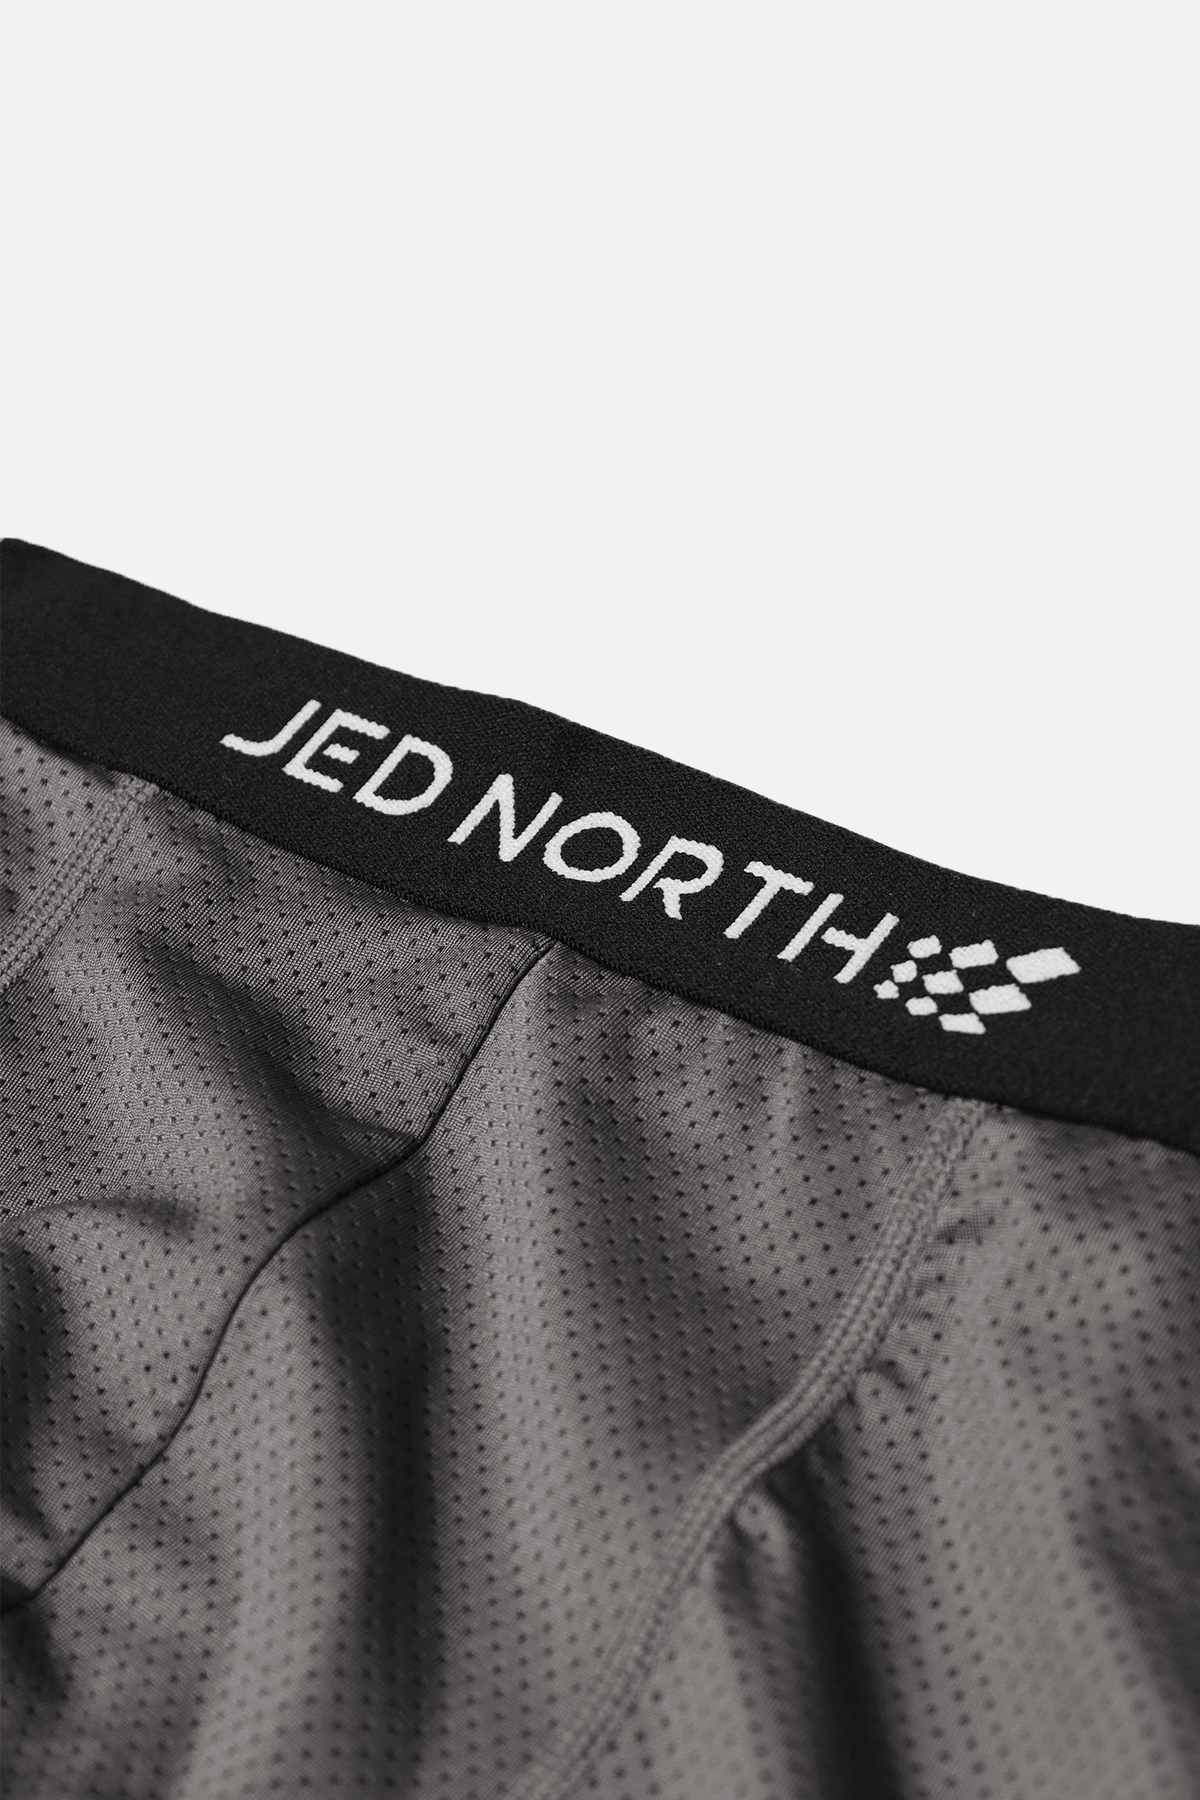 Men's Full Mesh Boxer Briefs Two Pack - Gray and Navy - Jed North Canada